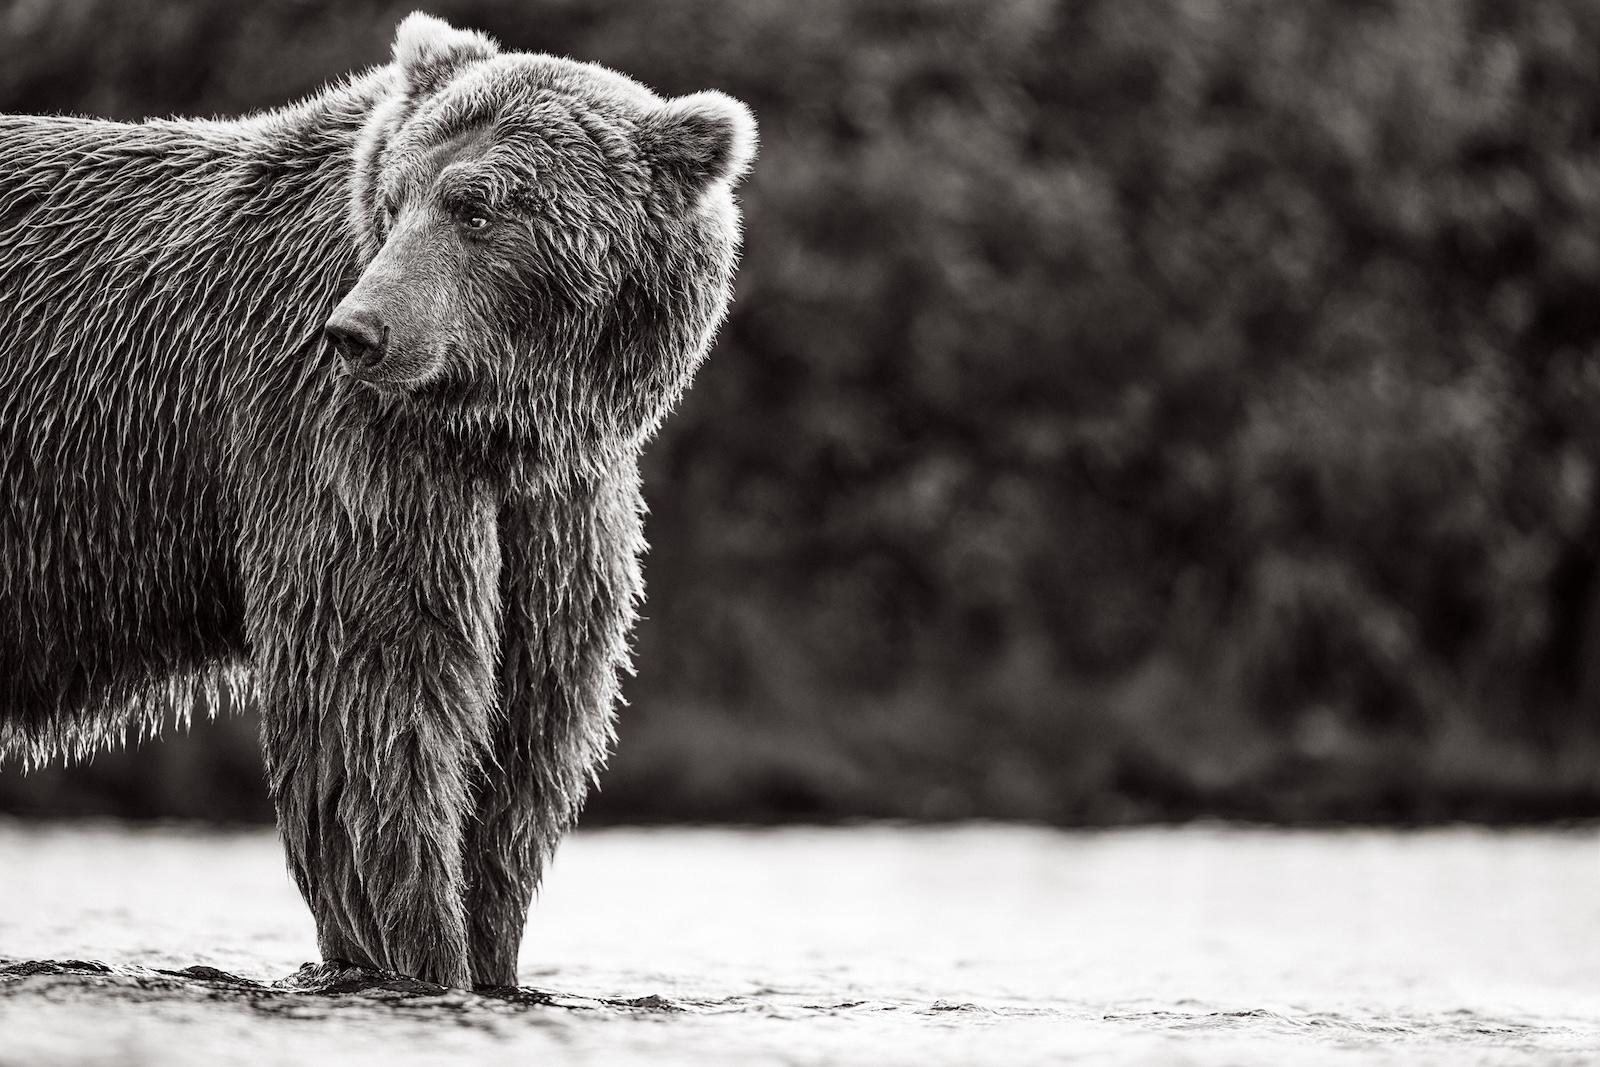 Drew Doggett Black and White Photograph - Portrait of a brown bear looking over his shoulder at the creek's edge